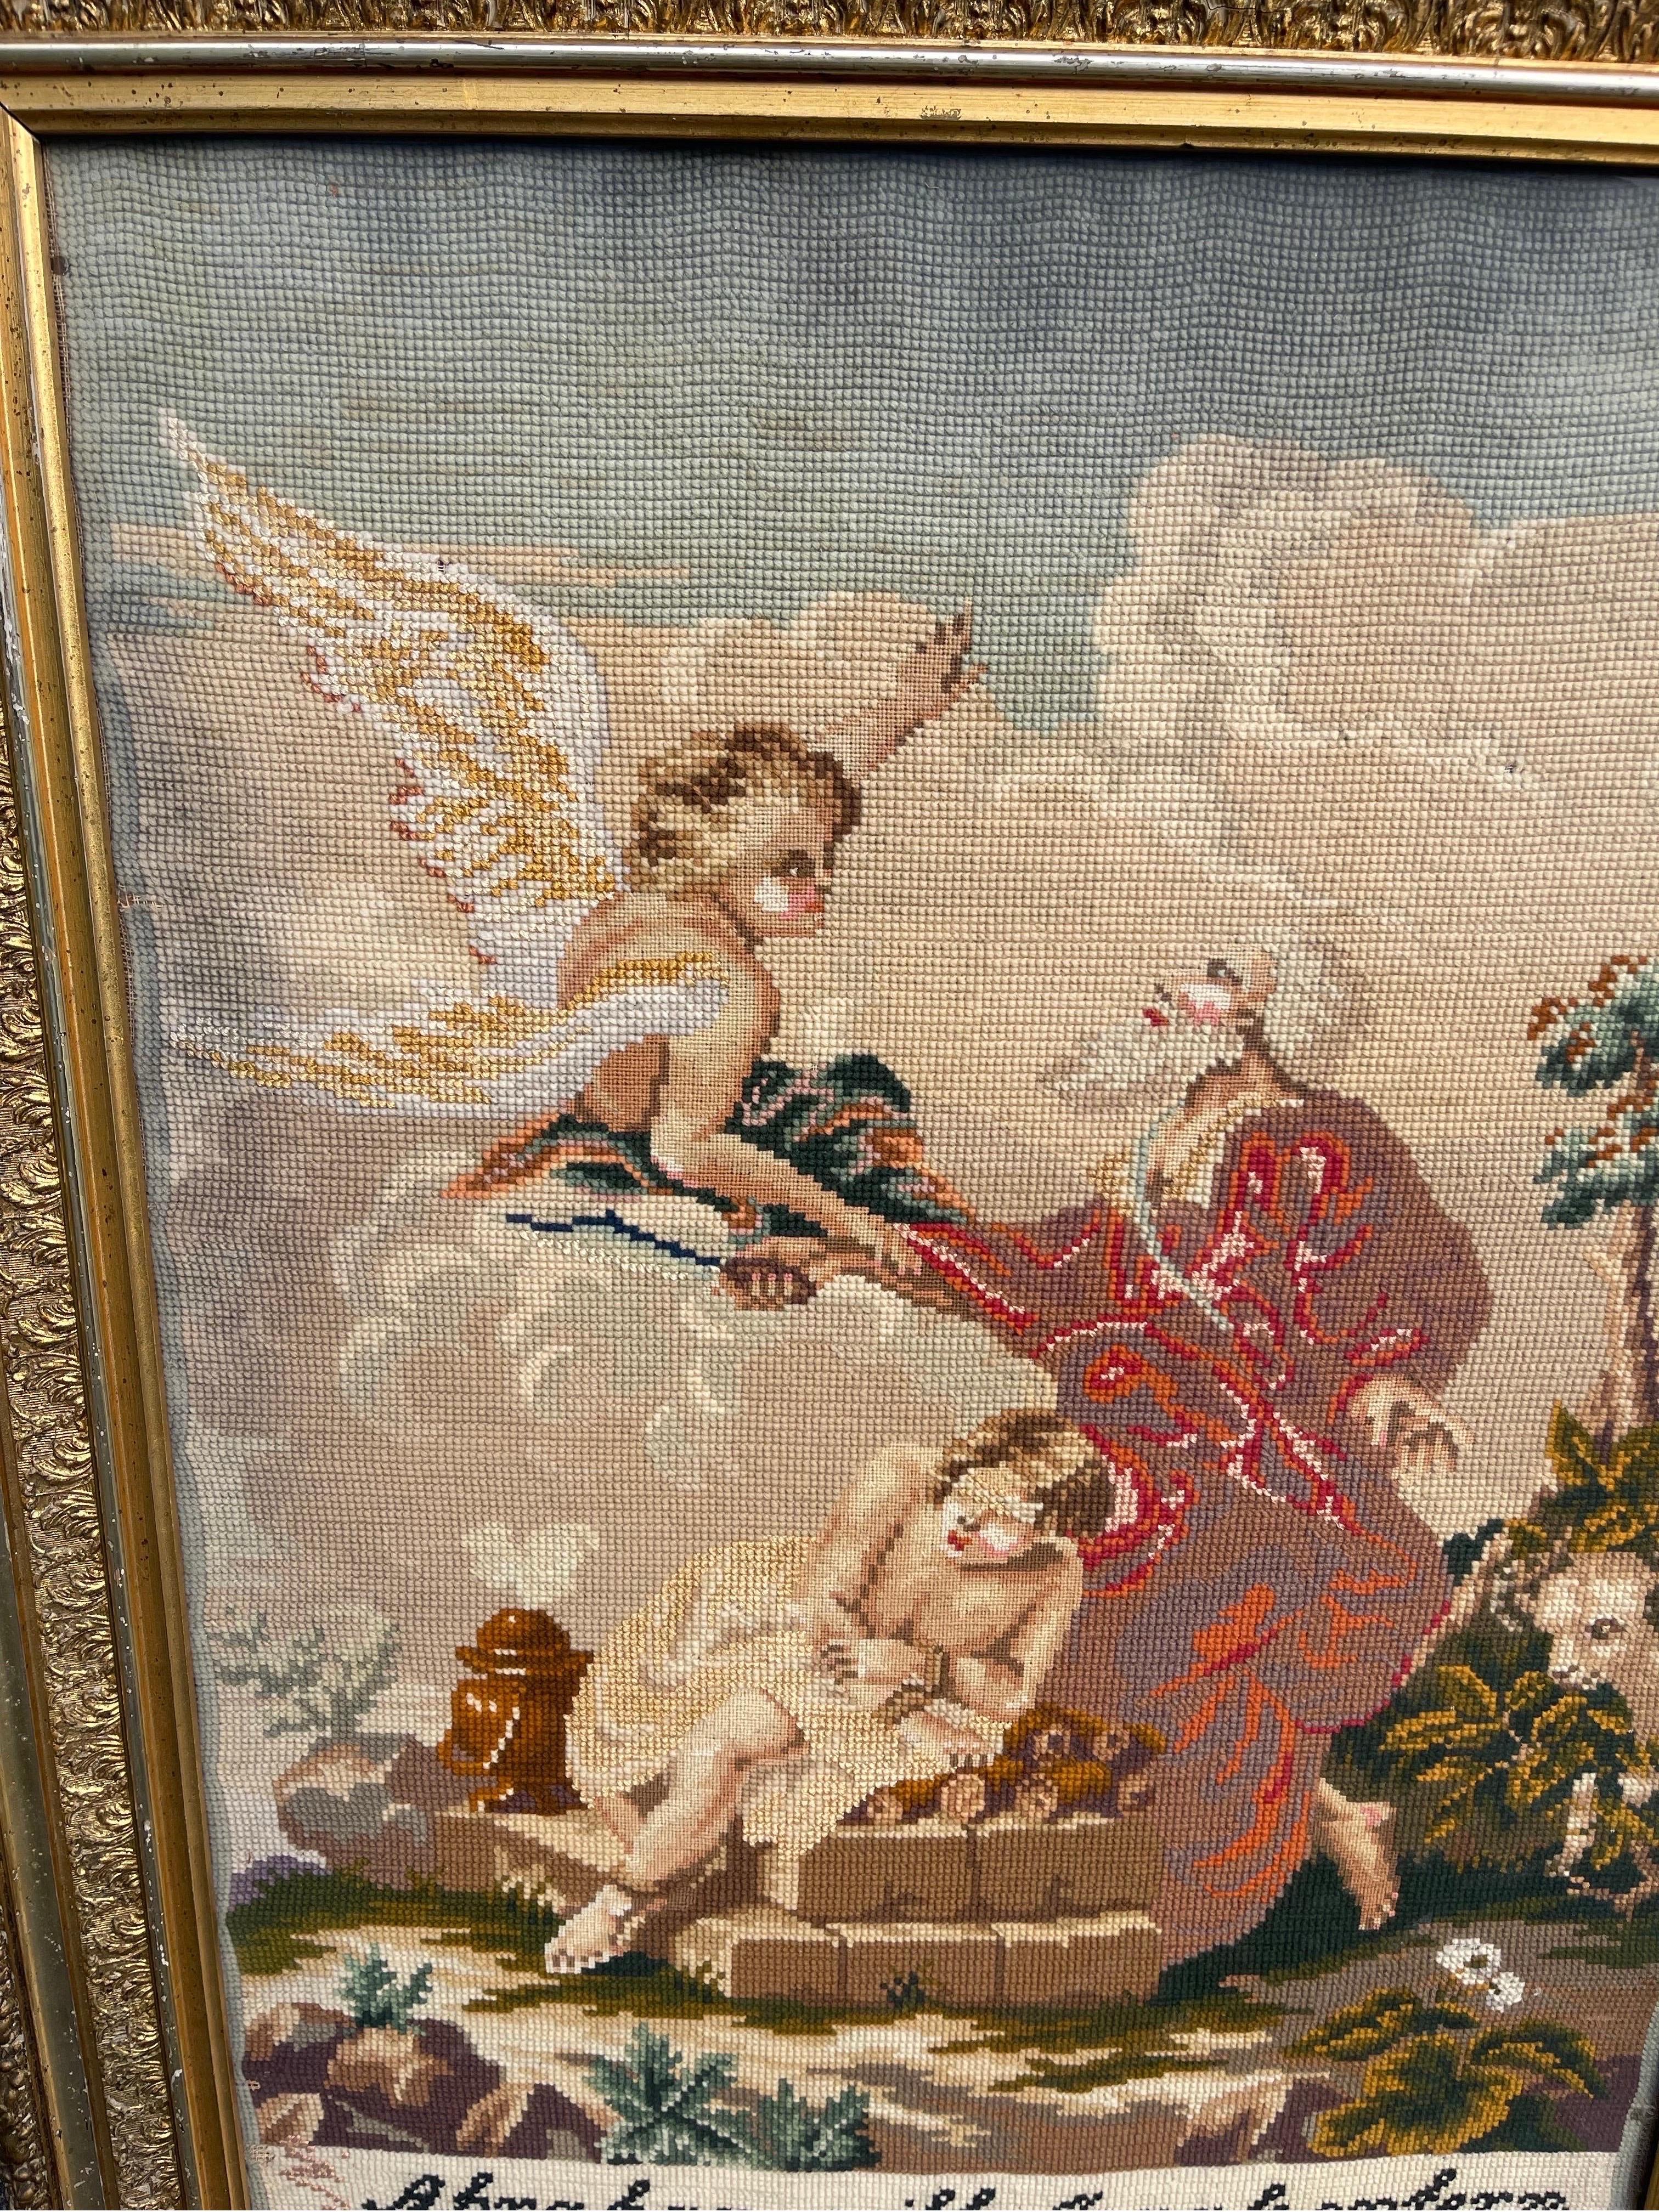 Fabulous antique needlepoint of the scene of the binding of Isaac, in which God commanded Abraham to bind and sacrifice his son, Isaac.